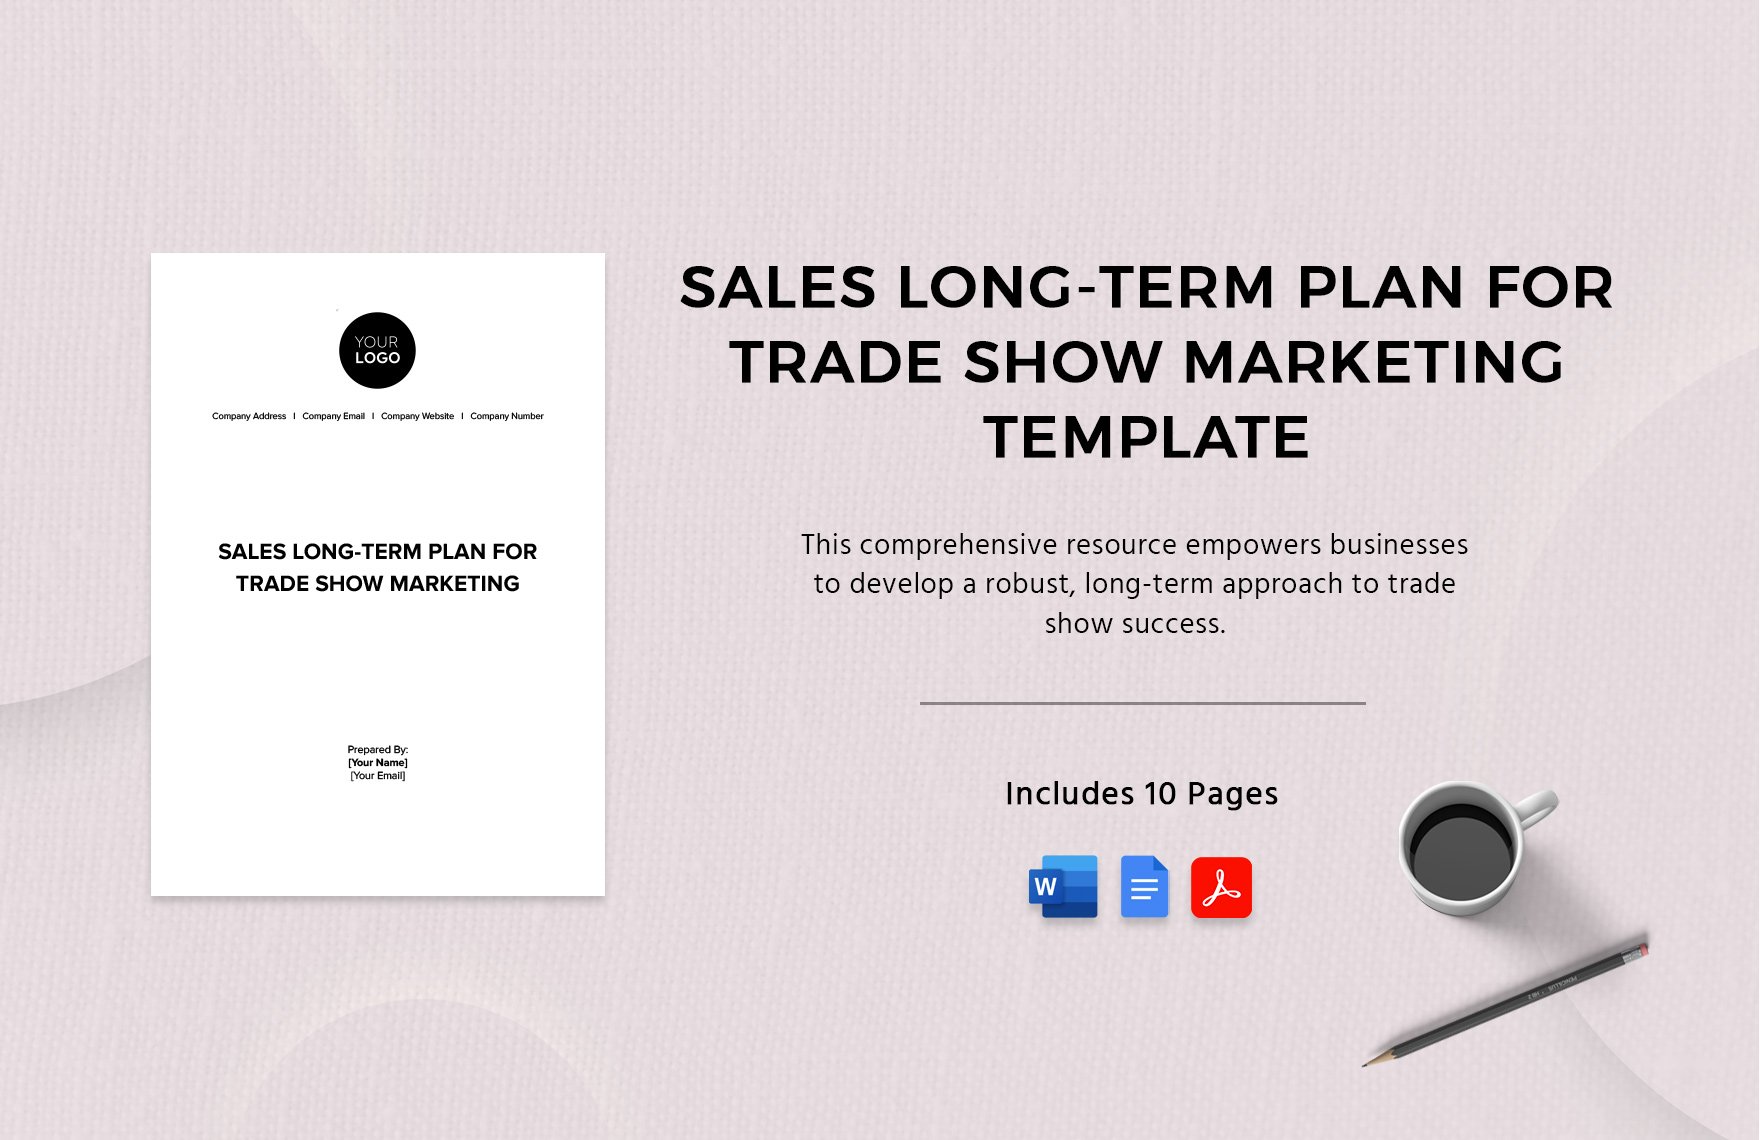 Sales Long-Term Plan for Trade Show Marketing Template